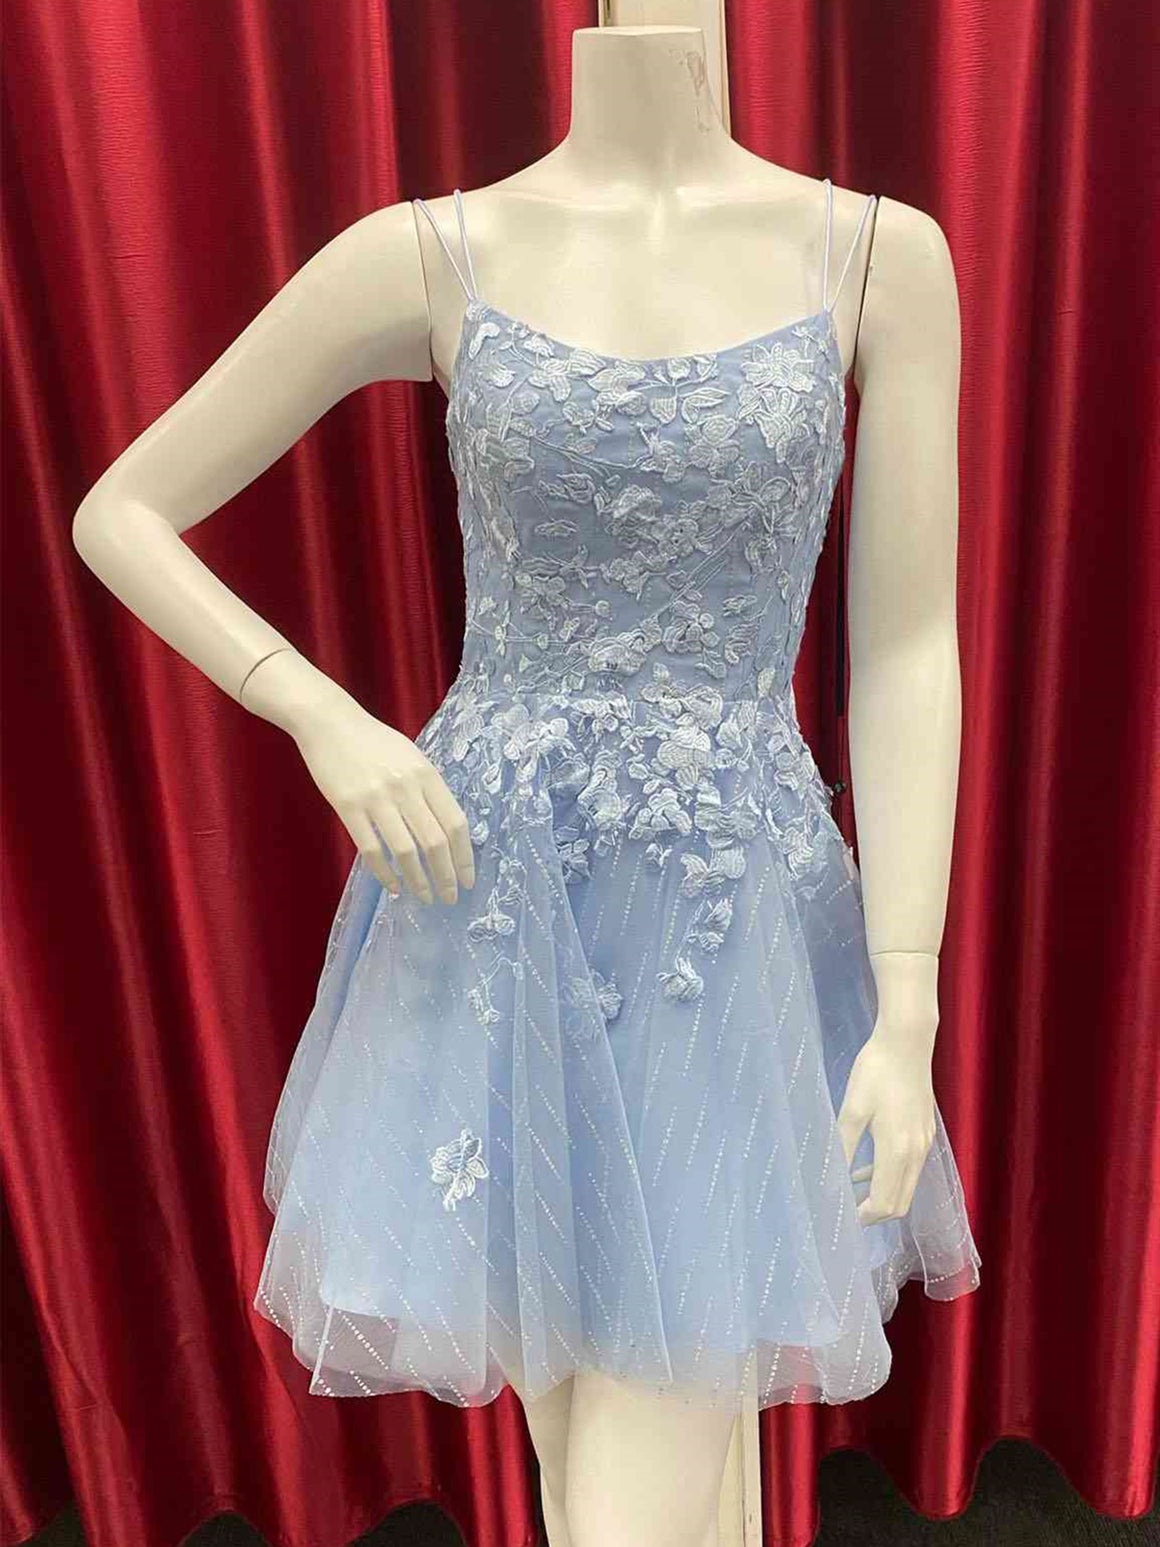 Short Backless Blue Lace Prom Dresses, Short Open Back Blue Lace Formal Homecoming Dresses